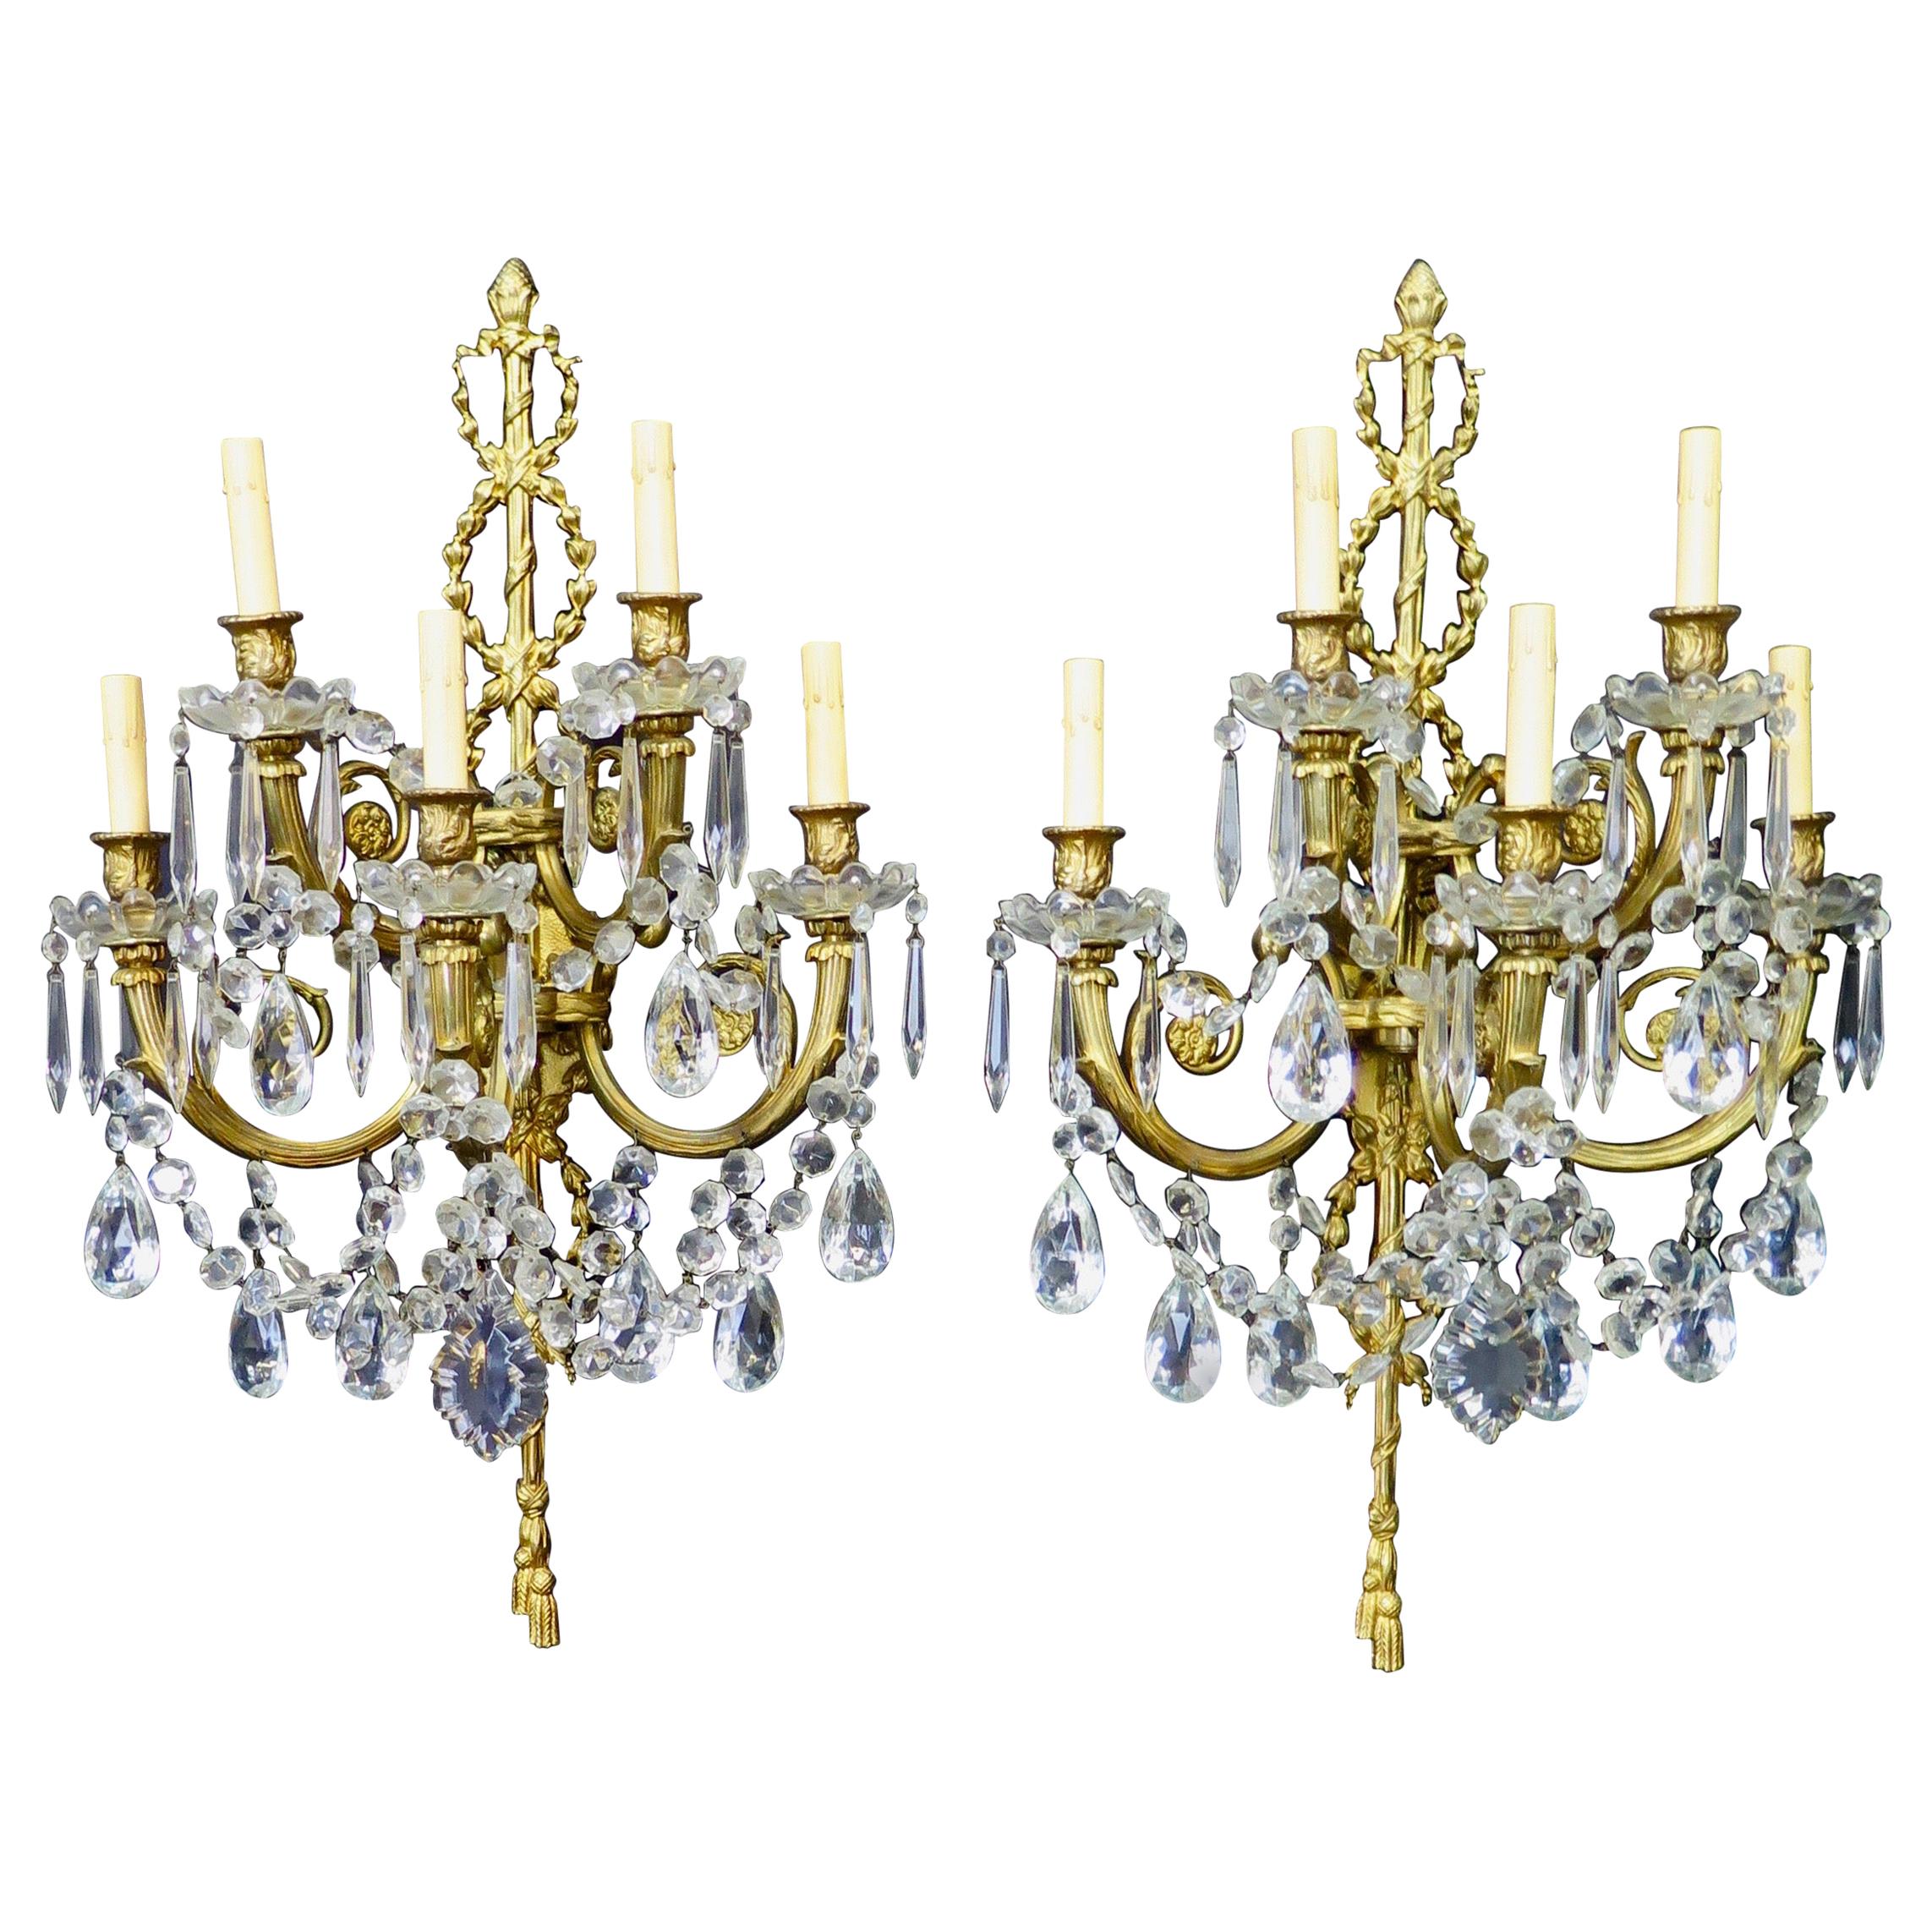 Vintage Pair of Elaborate French Louis XV Style Wall Sconces For Sale